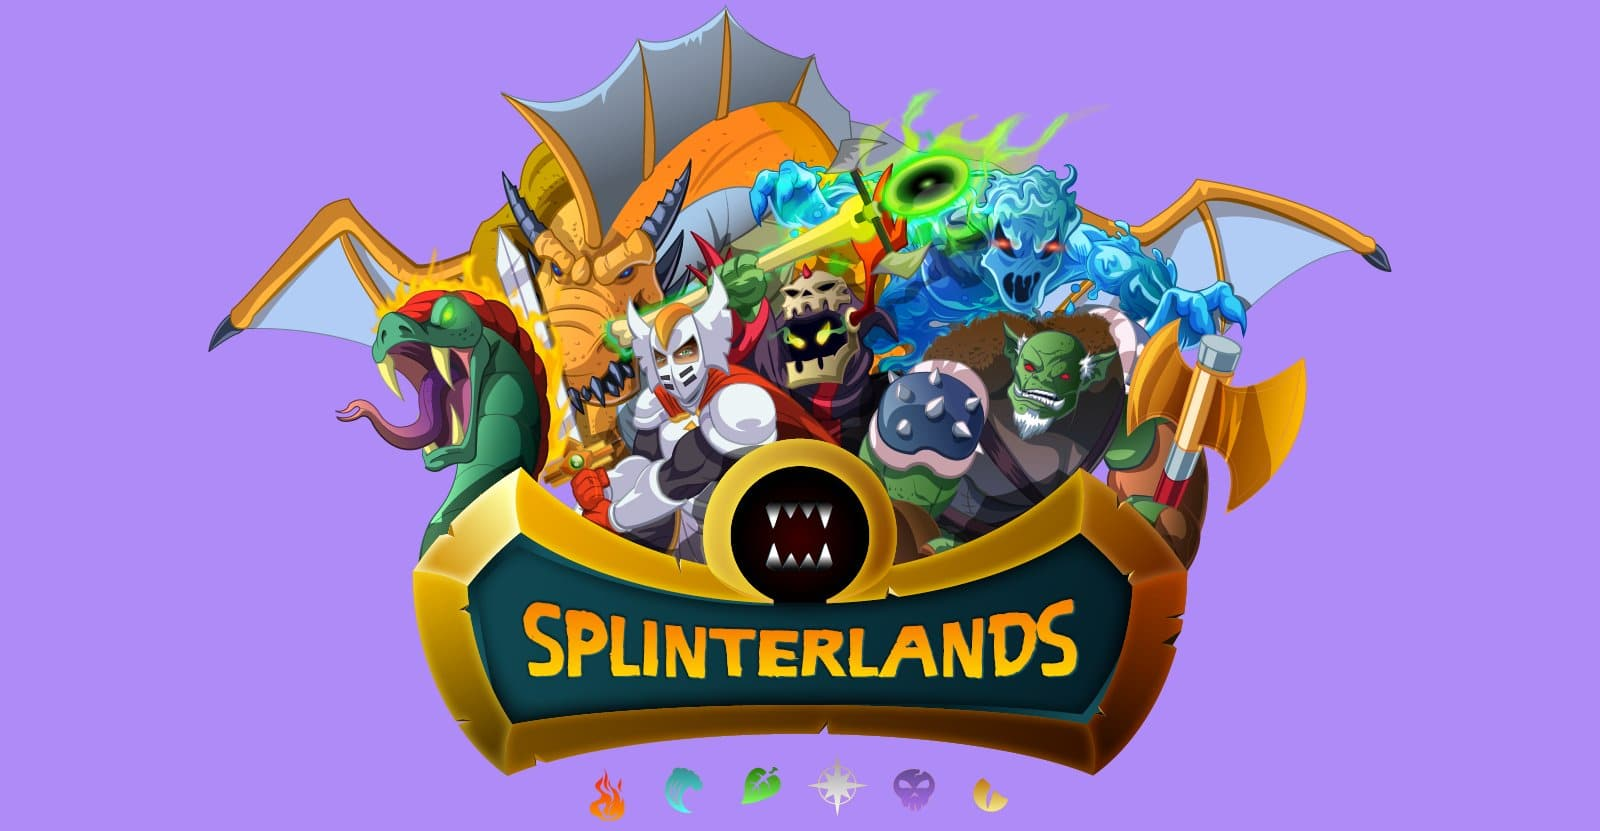 Splinterland game was previously known as Steem Monsters 